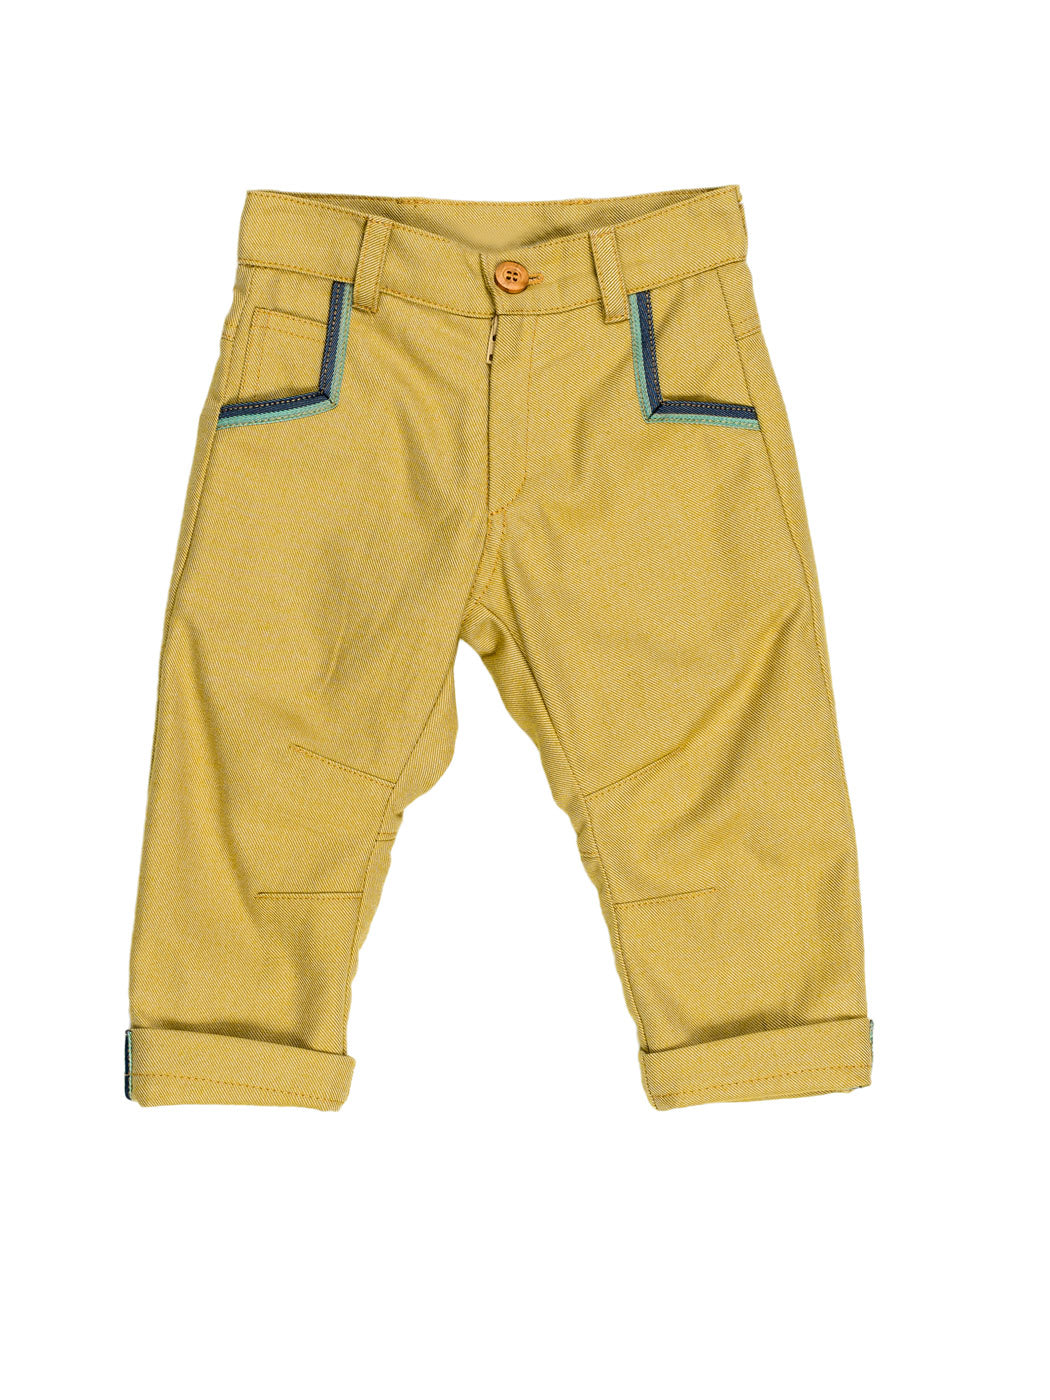 TOMMY baby cotton pants-50% off